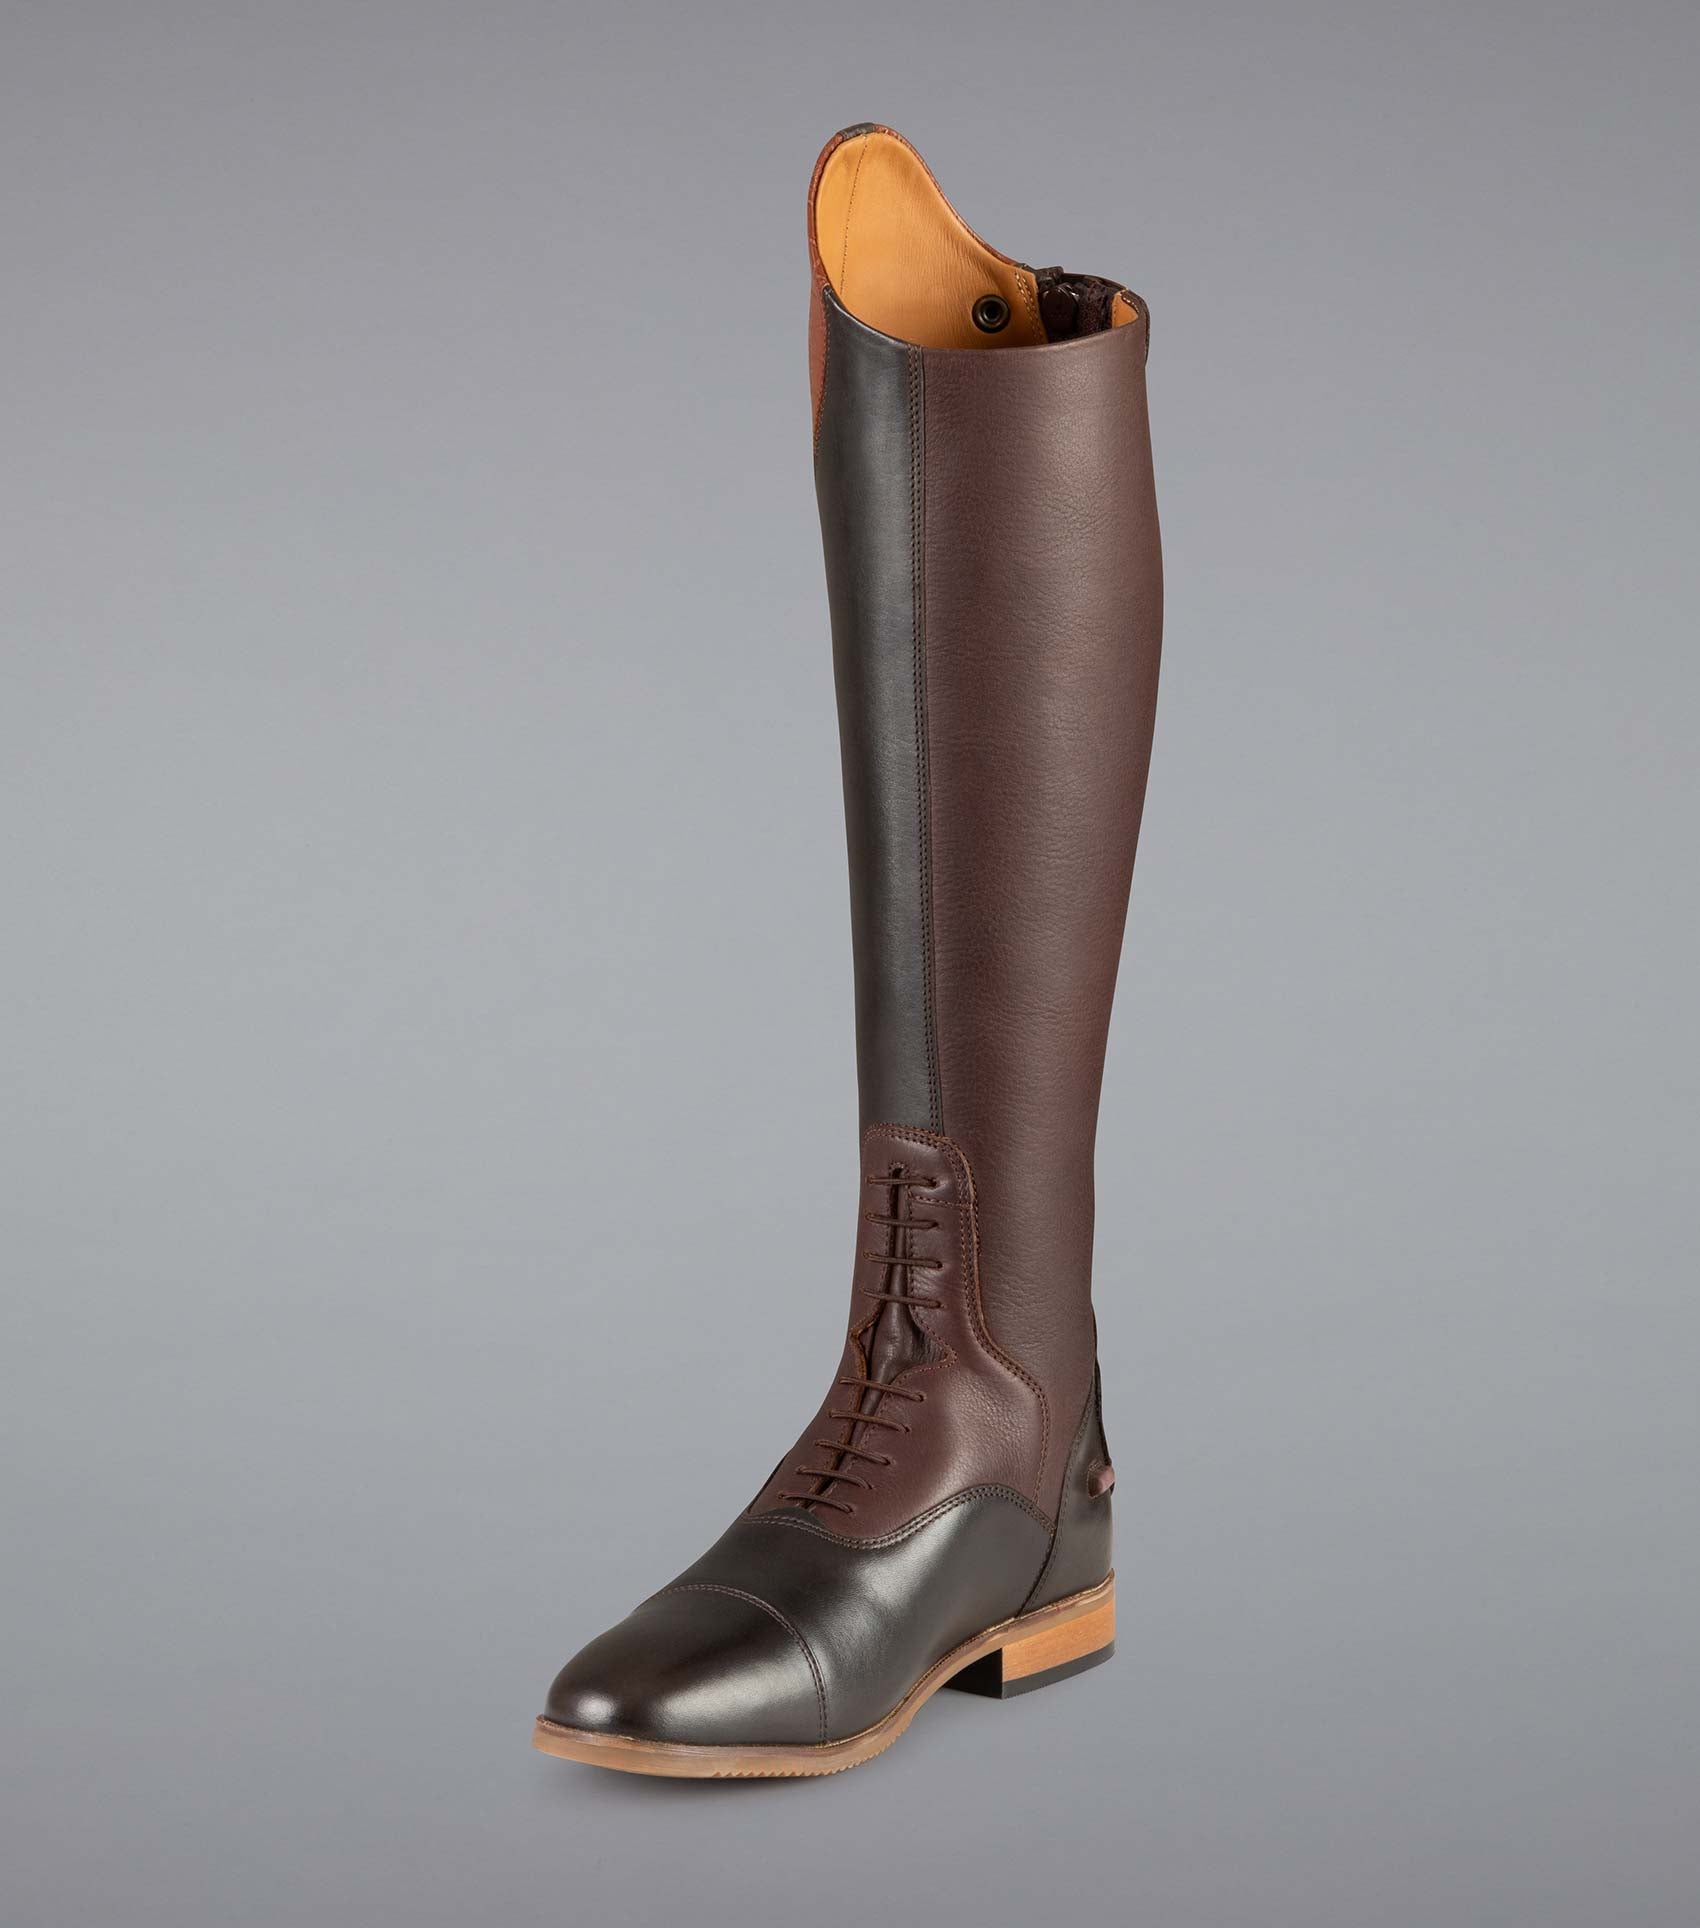 Premier Equine Passaggio Ladies Leather Field Tall Riding Boot